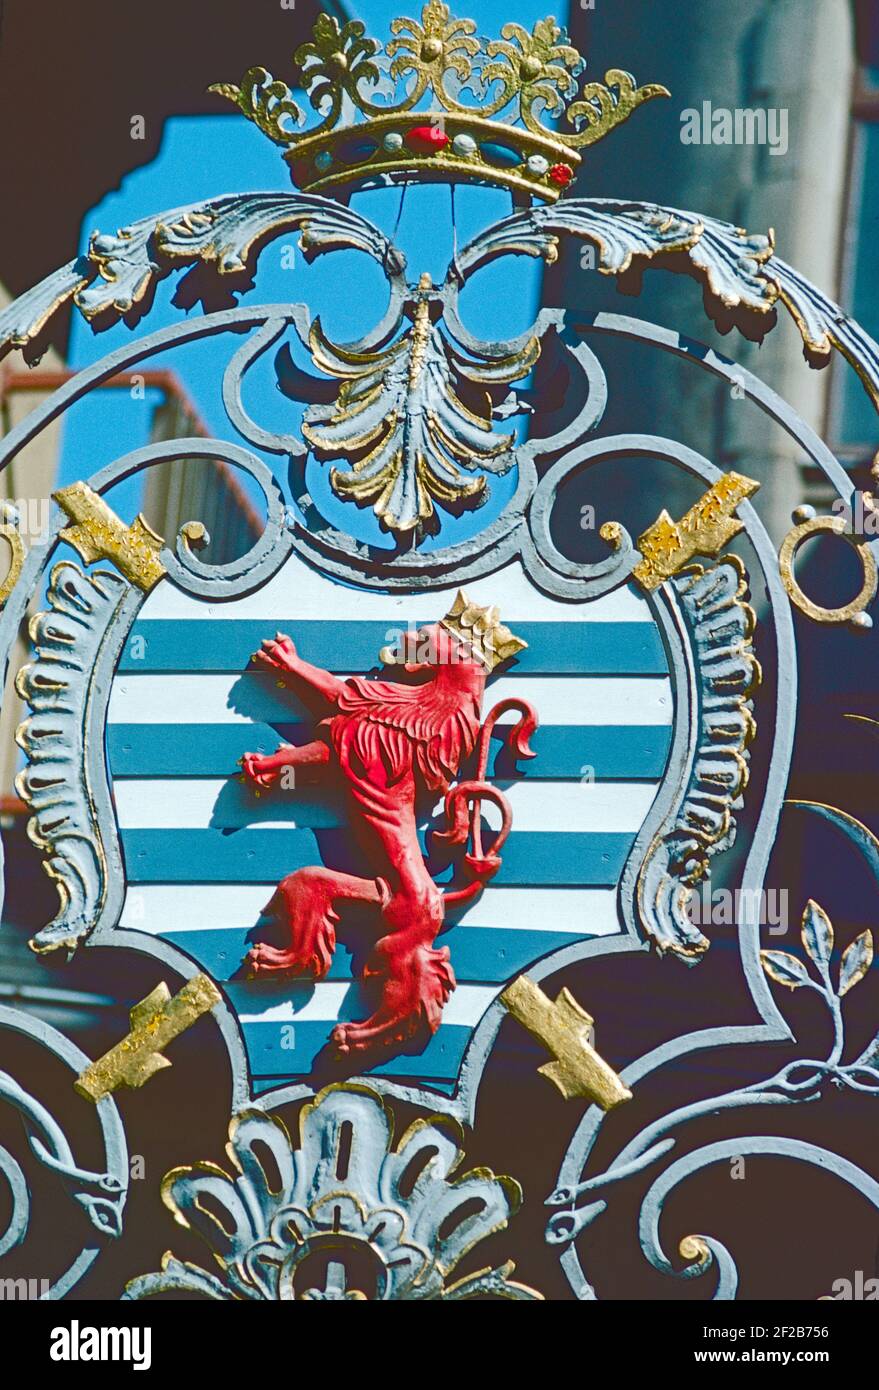 Luxembourg. The Luxembourg coat of arms depicted on the gates of the royal palace in the Old City. Stock Photo